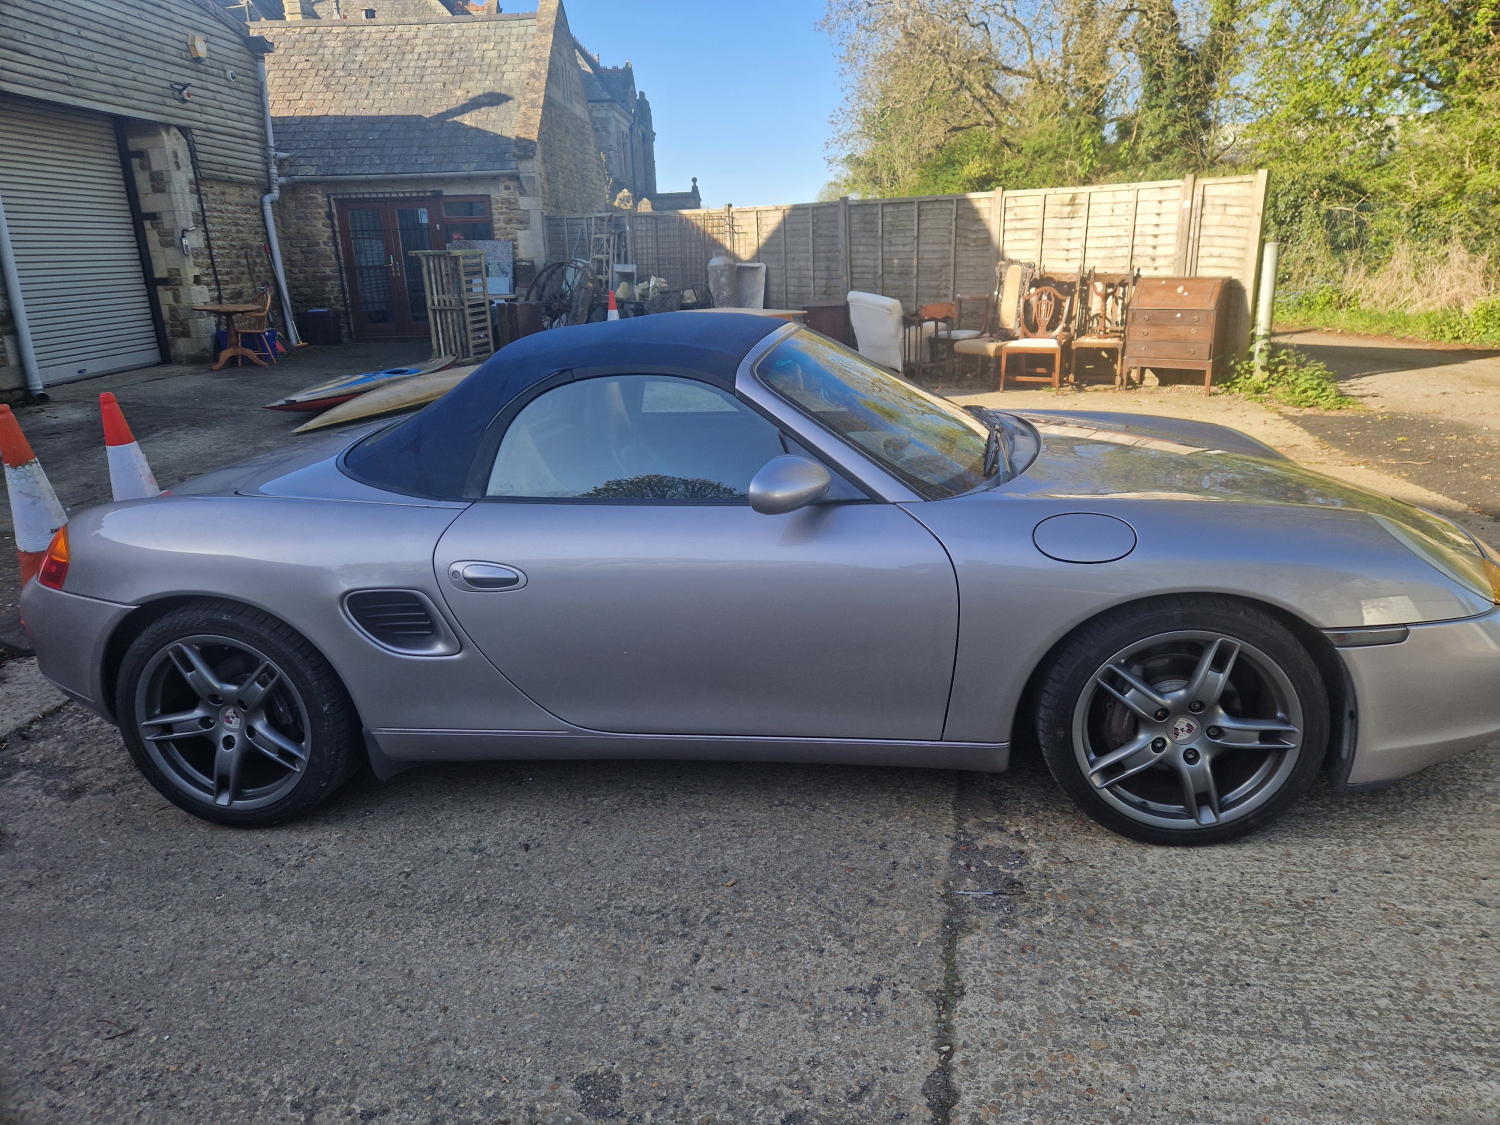 PORSCHE BOXTER CONVERTIBLE 2002. 129,000 MILES. NEW MOT. MUCH SERVICE HISTORY, OWNERS MANUAL. GOOD - Image 2 of 7